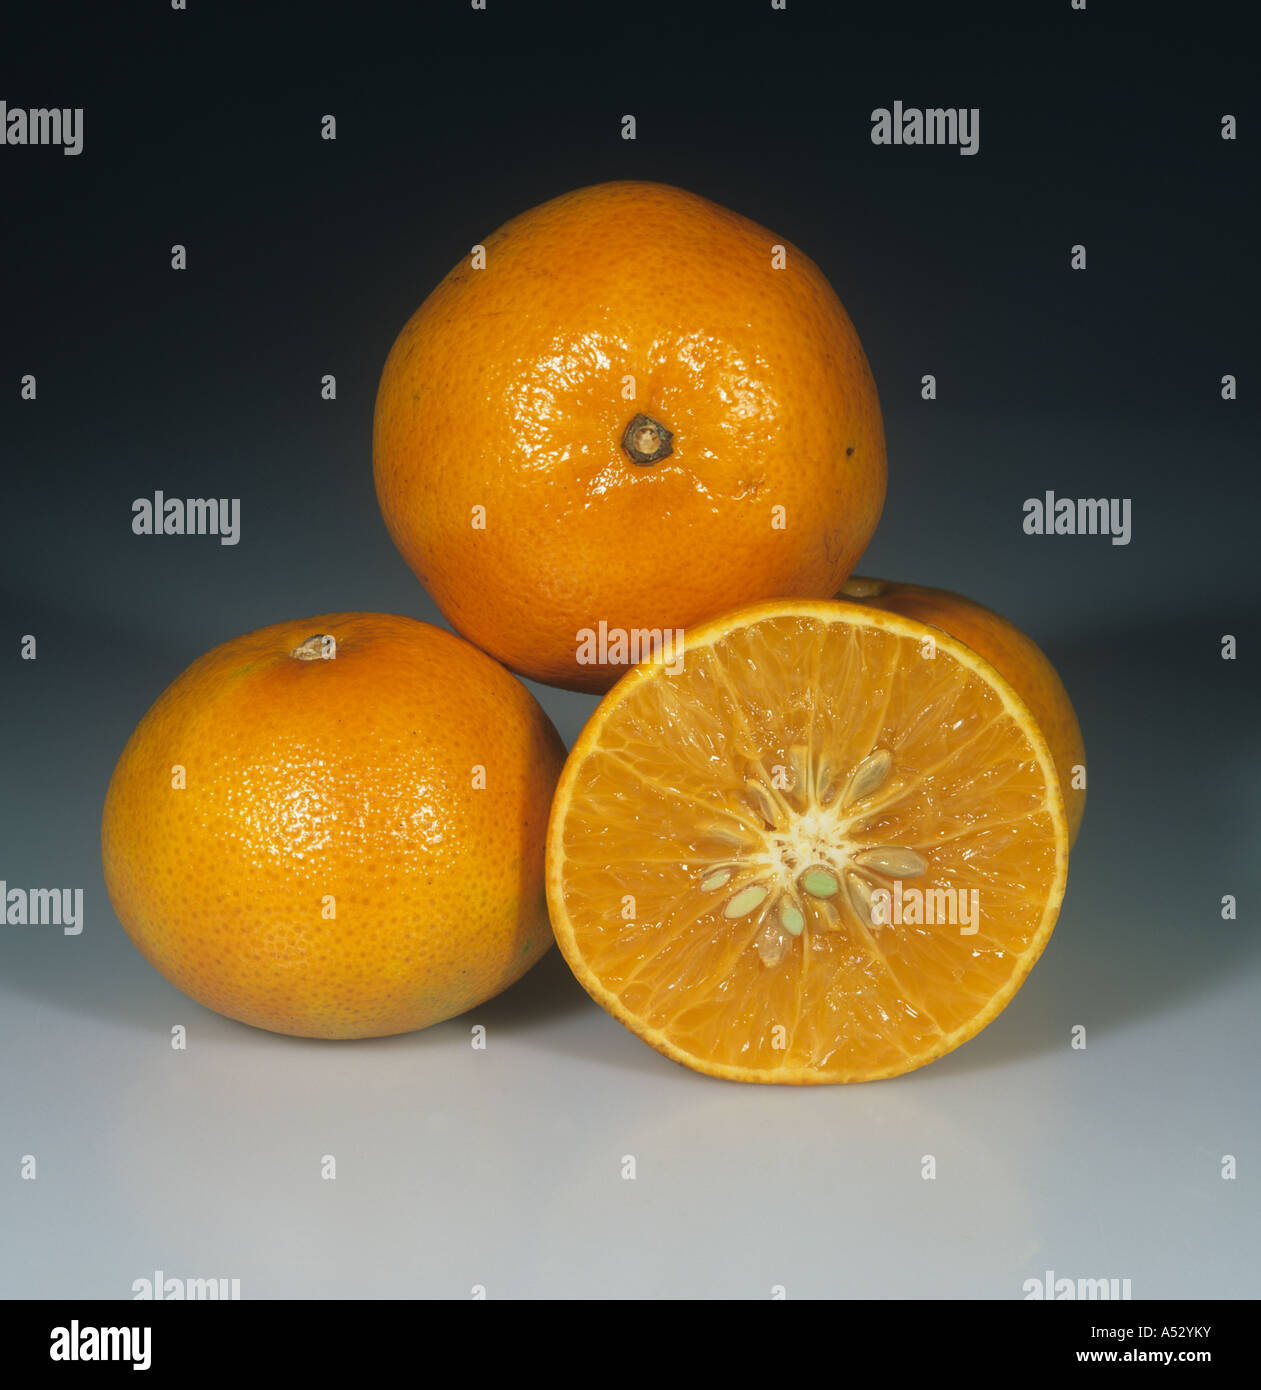 Whole and sectioned tangerine fruit variety Fallglo Stock Photo